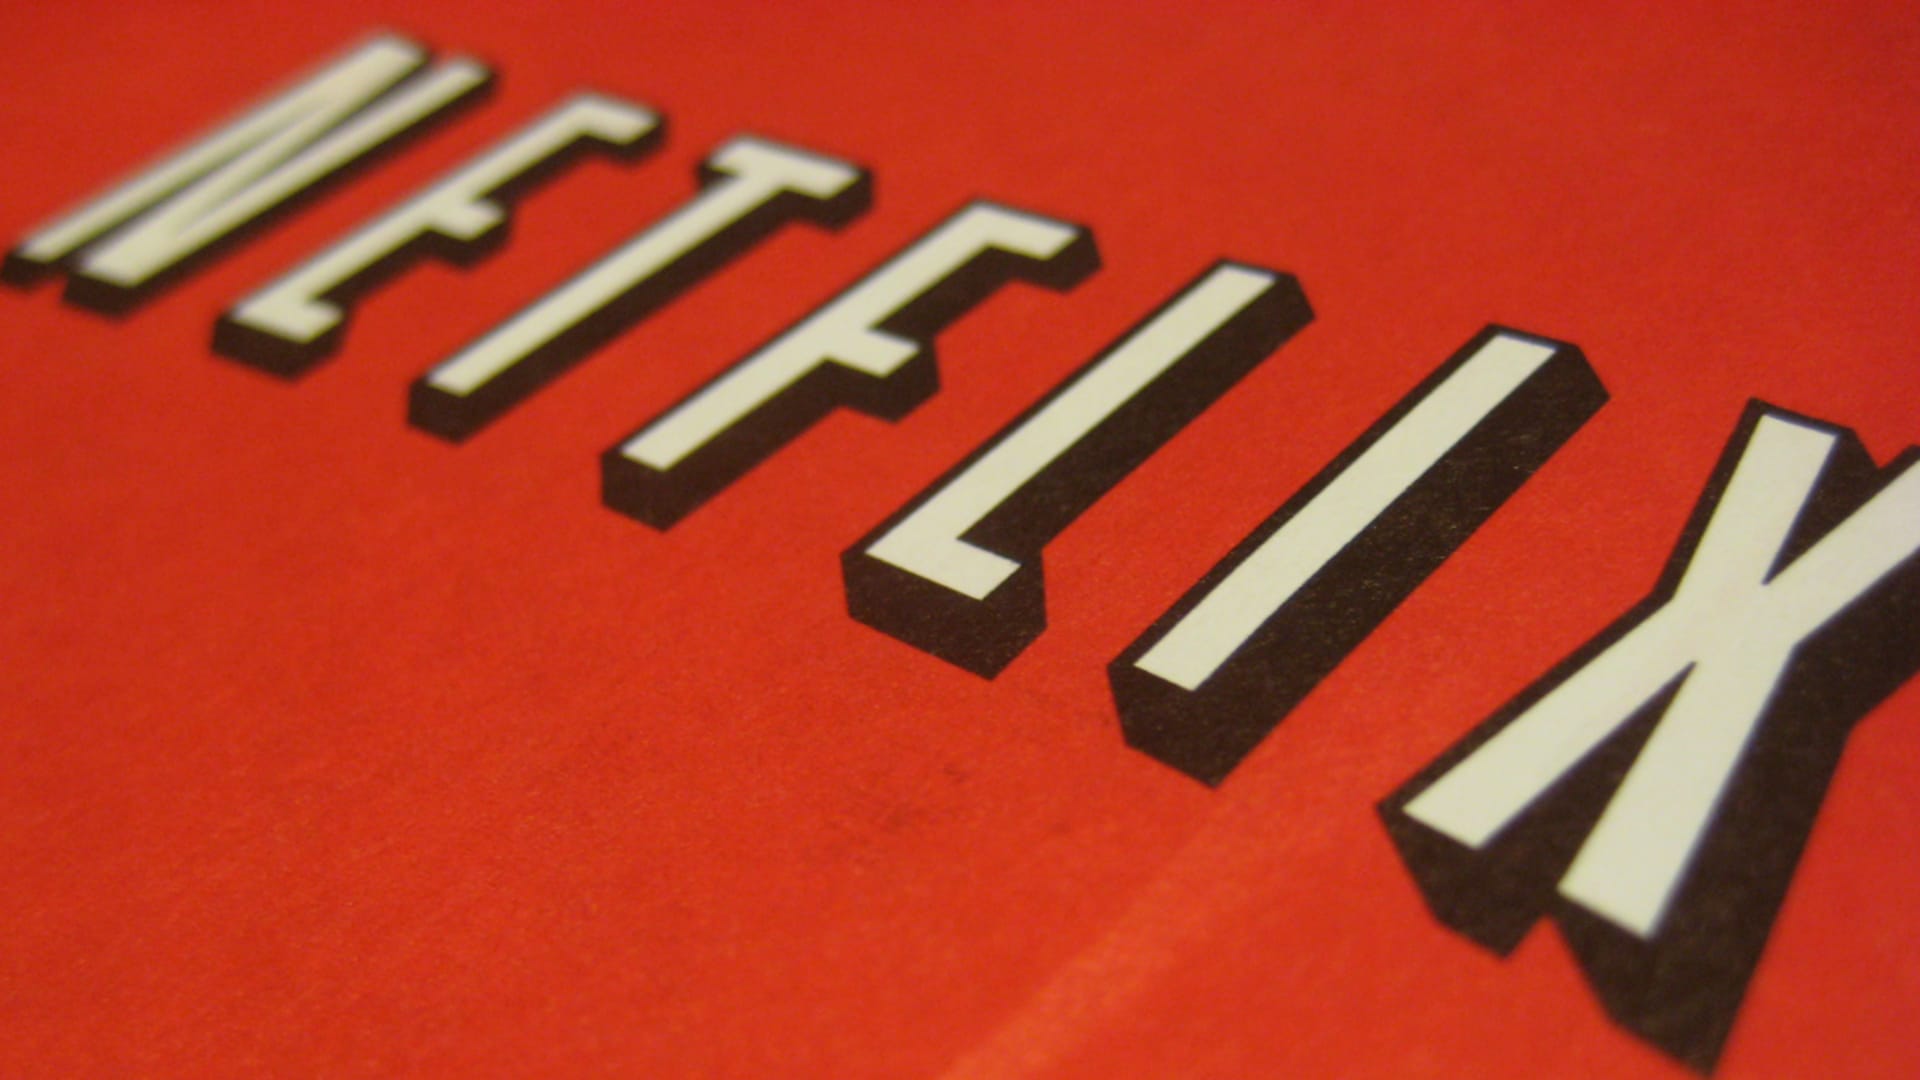 Netflix analysts turn into TV critics and throw stock downgrades instead of tomatoes